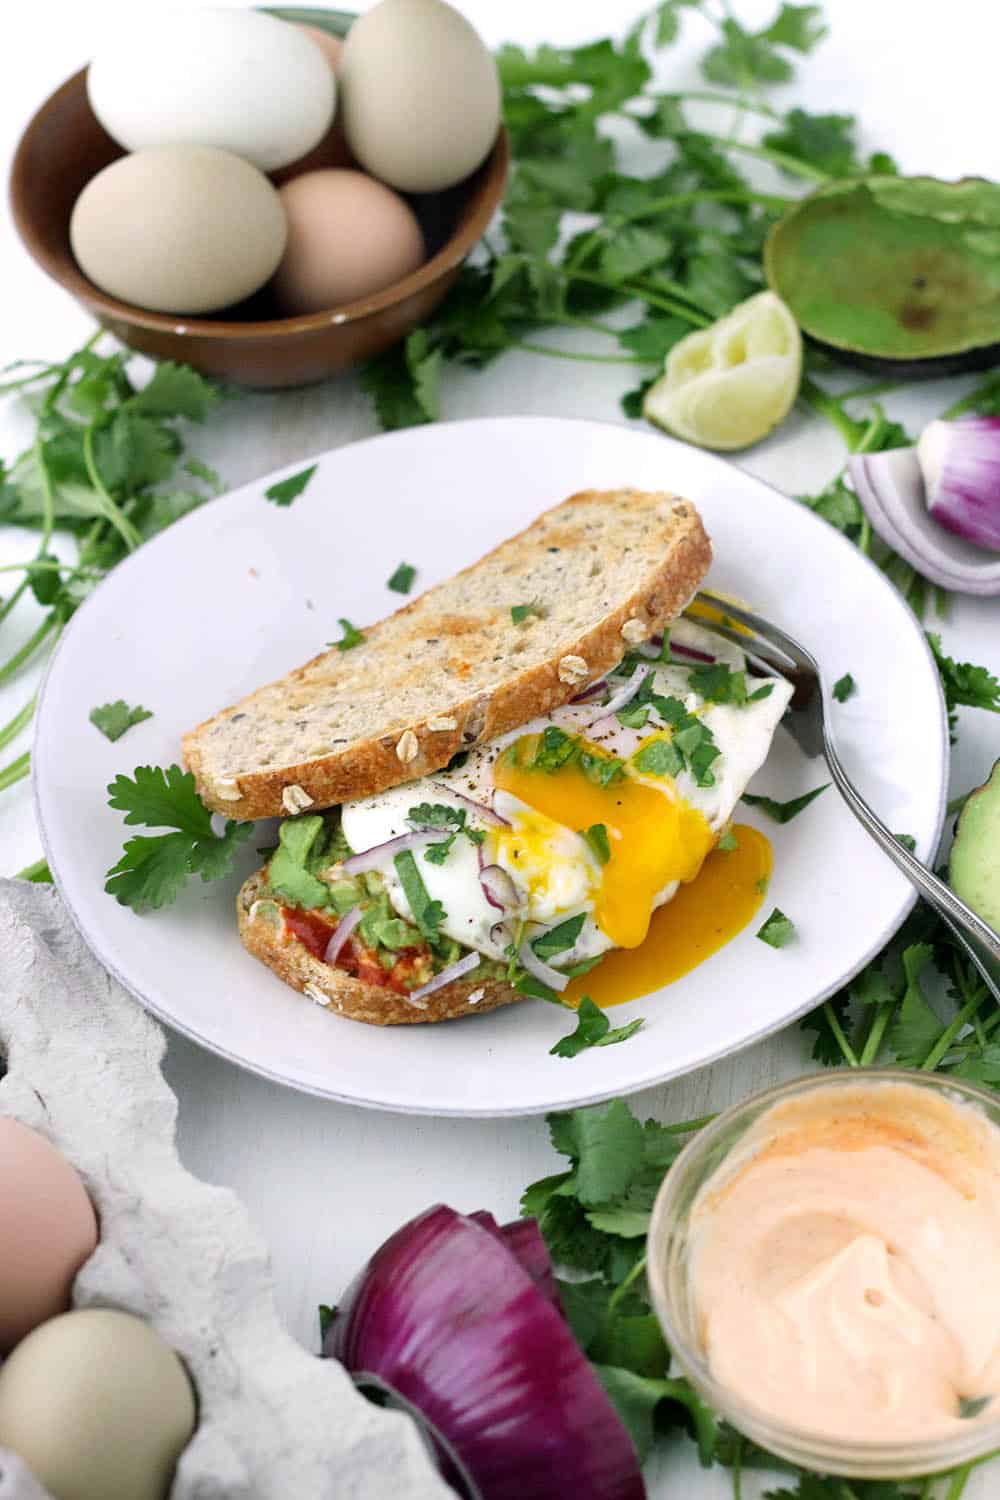 This Vegetarian Breakfast Sandwich Recipe is my absolute favorite. Features smashed avocado, Sriracha mayo, and a perfect sunny-side-up egg, with a little lime juice, cilantro, and red onion for extra flavor. It's easy to make for a hearty weekend breakfast or brunch!